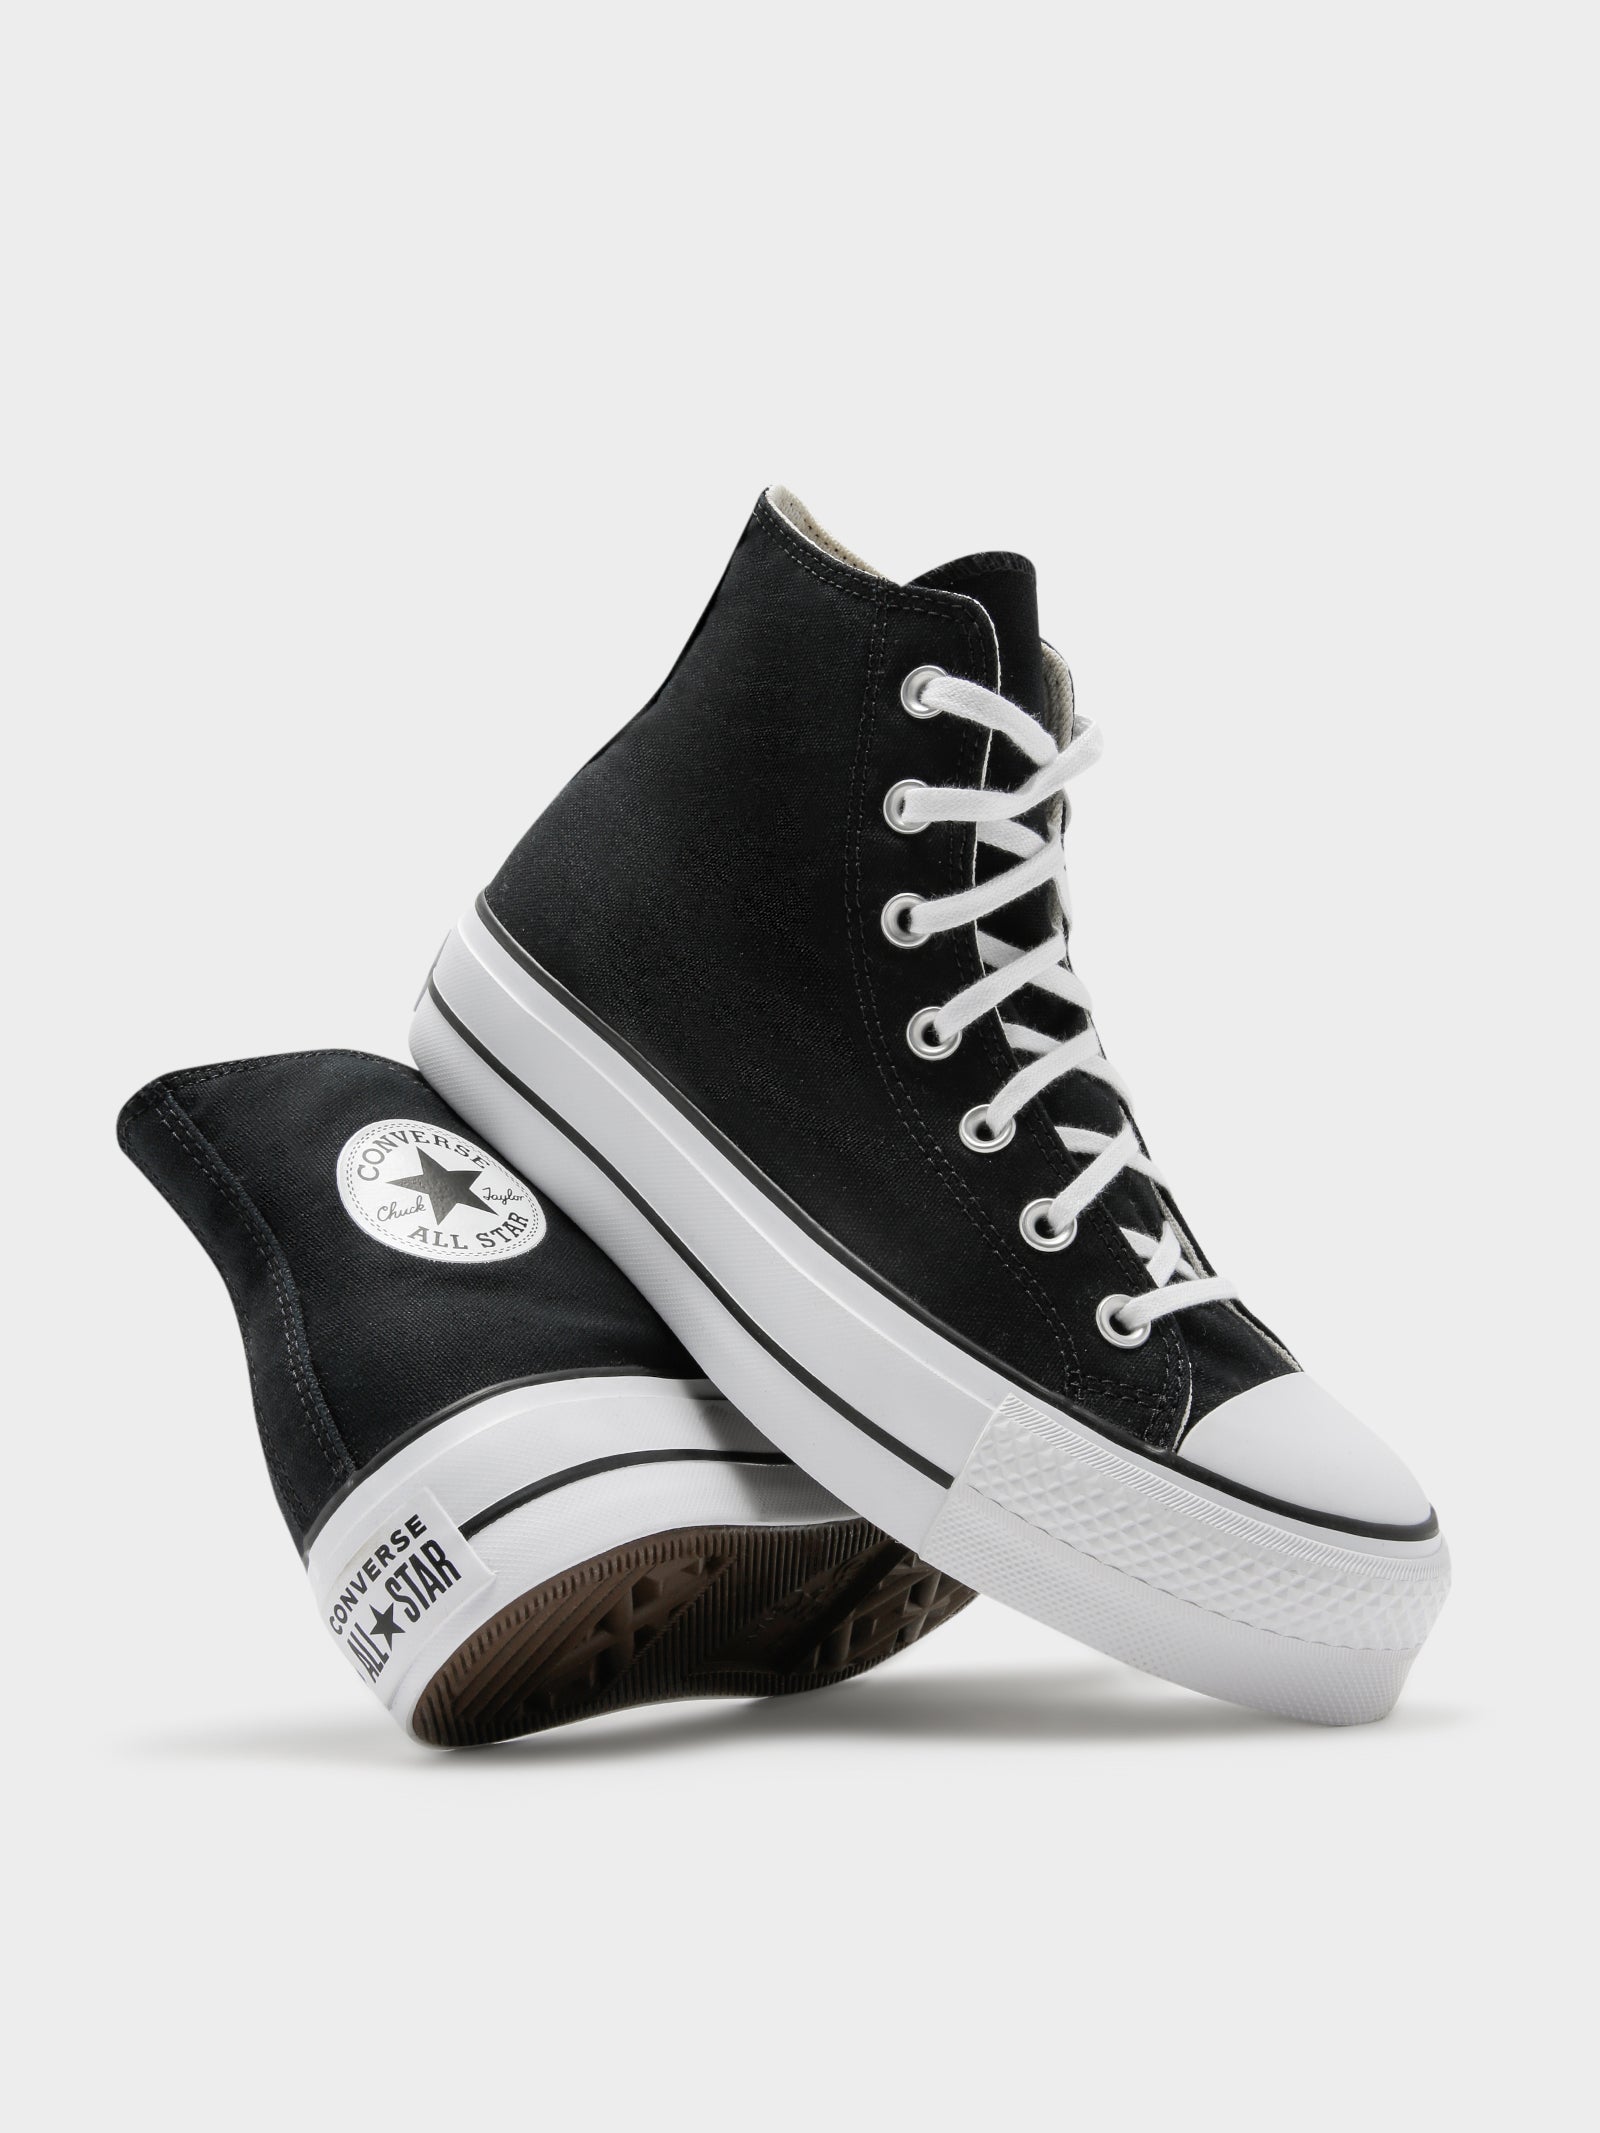 Womens Chuck Taylor All Star Hi Platform Sneakers in Black Canvas - Glue Store